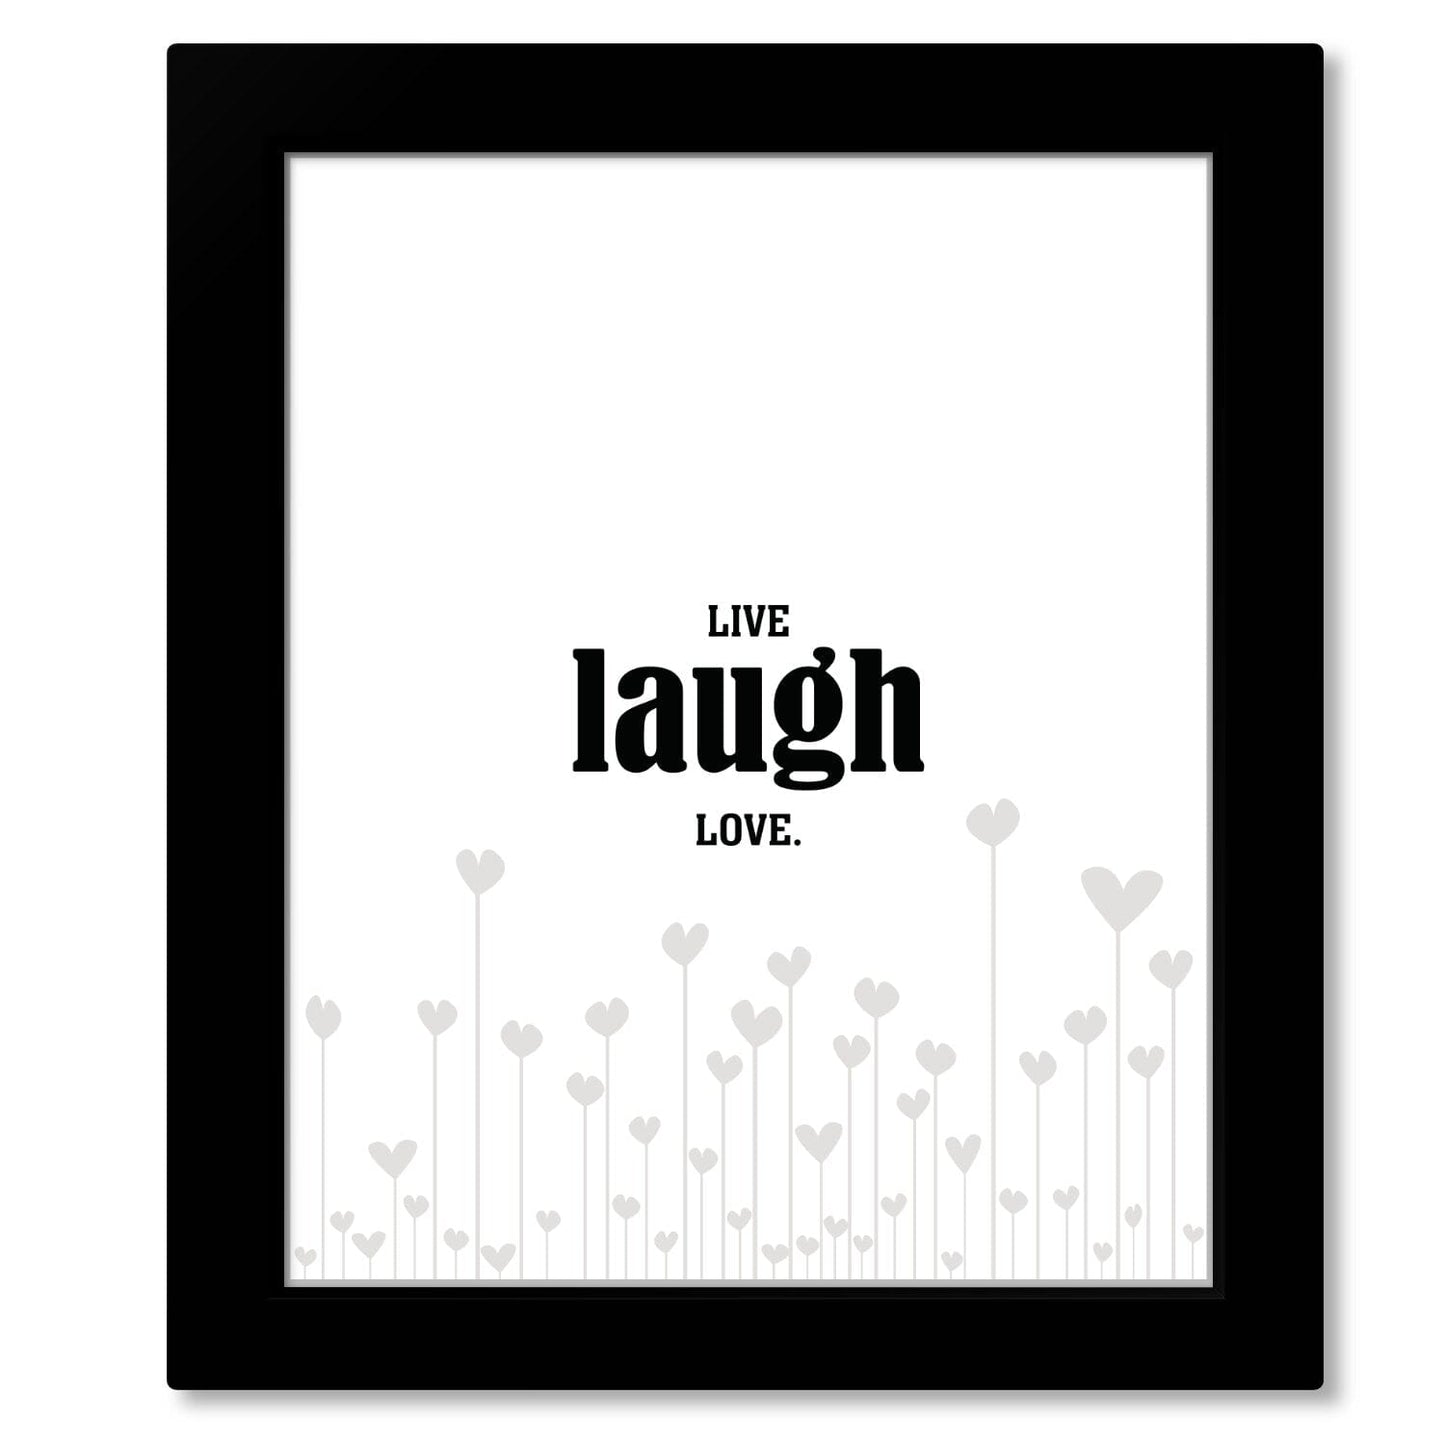 Light-Hearted Wall Art - Live Laugh Love - Wise and Witty Wise and Wiseass Quotes Song Lyrics Art 8x10 Framed Print 